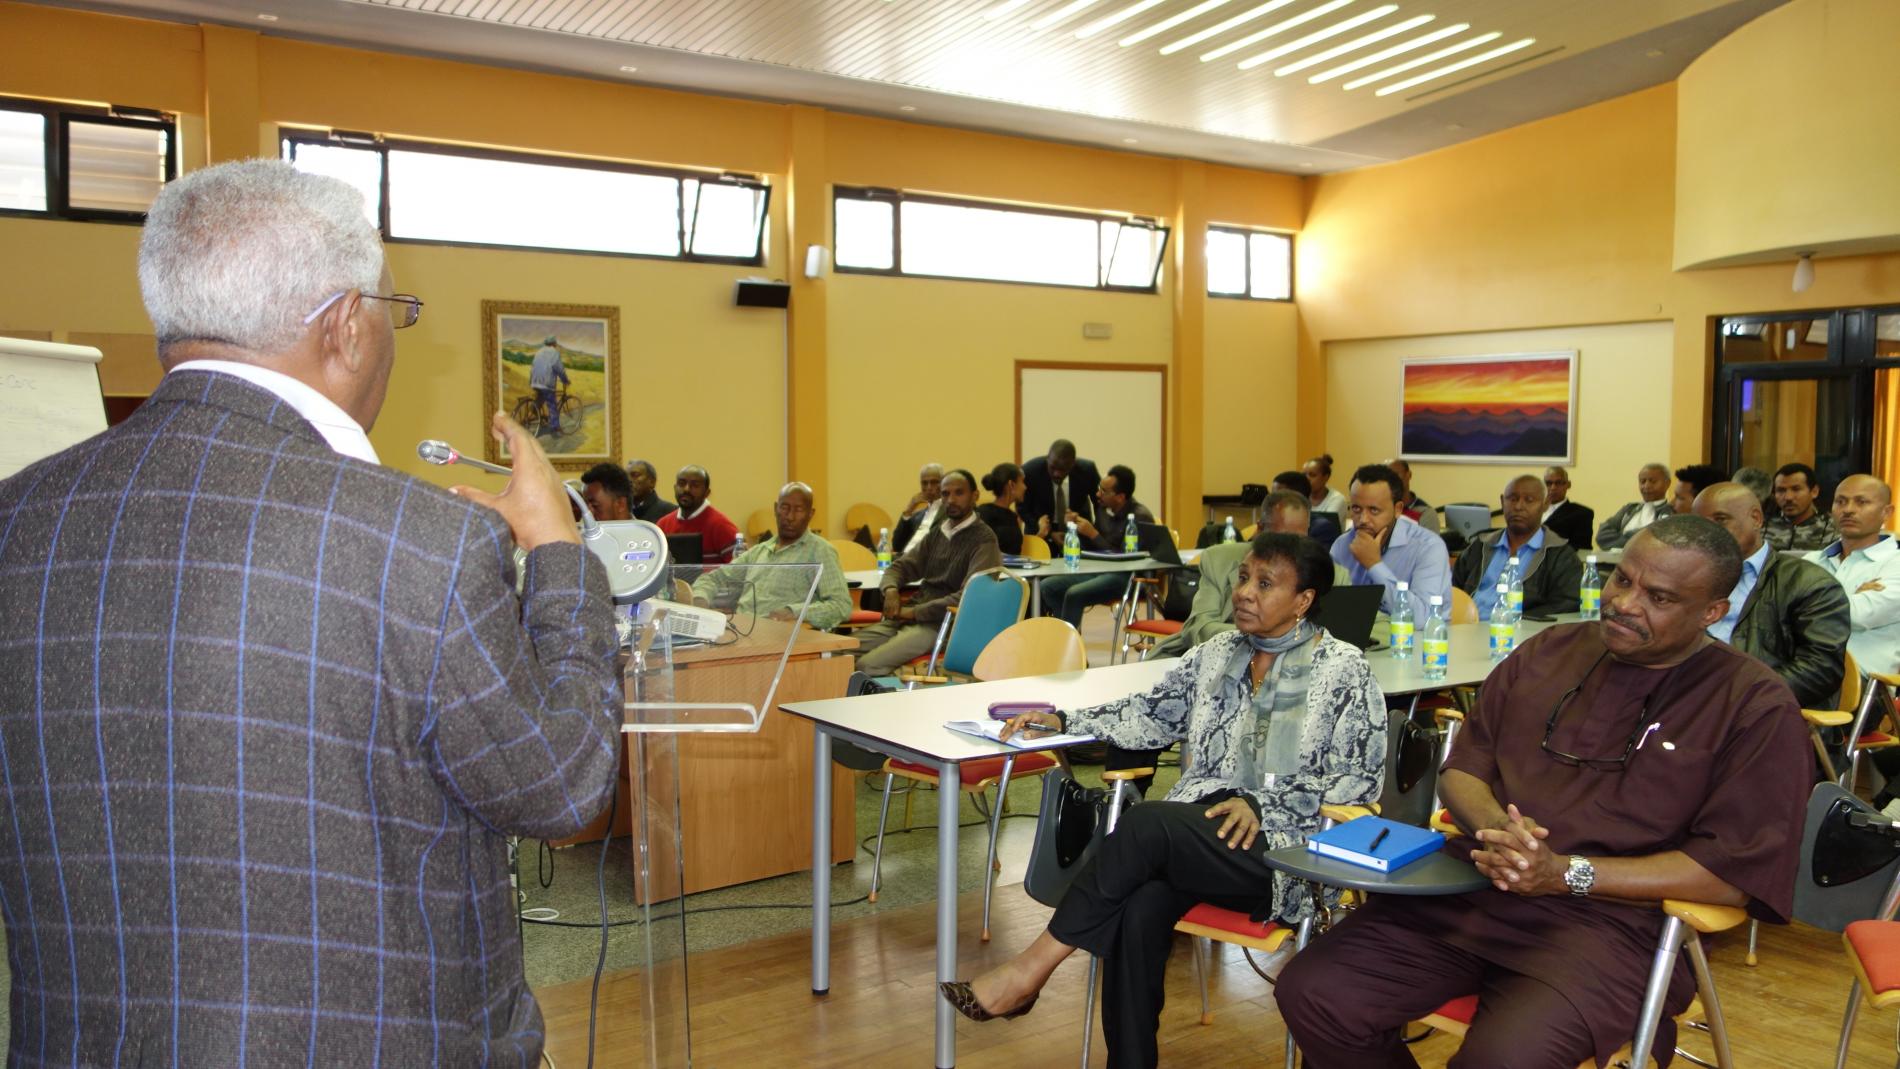 Dr Berhane Debru - Acting Director General of Policy and Planning at MOH addressing the participants